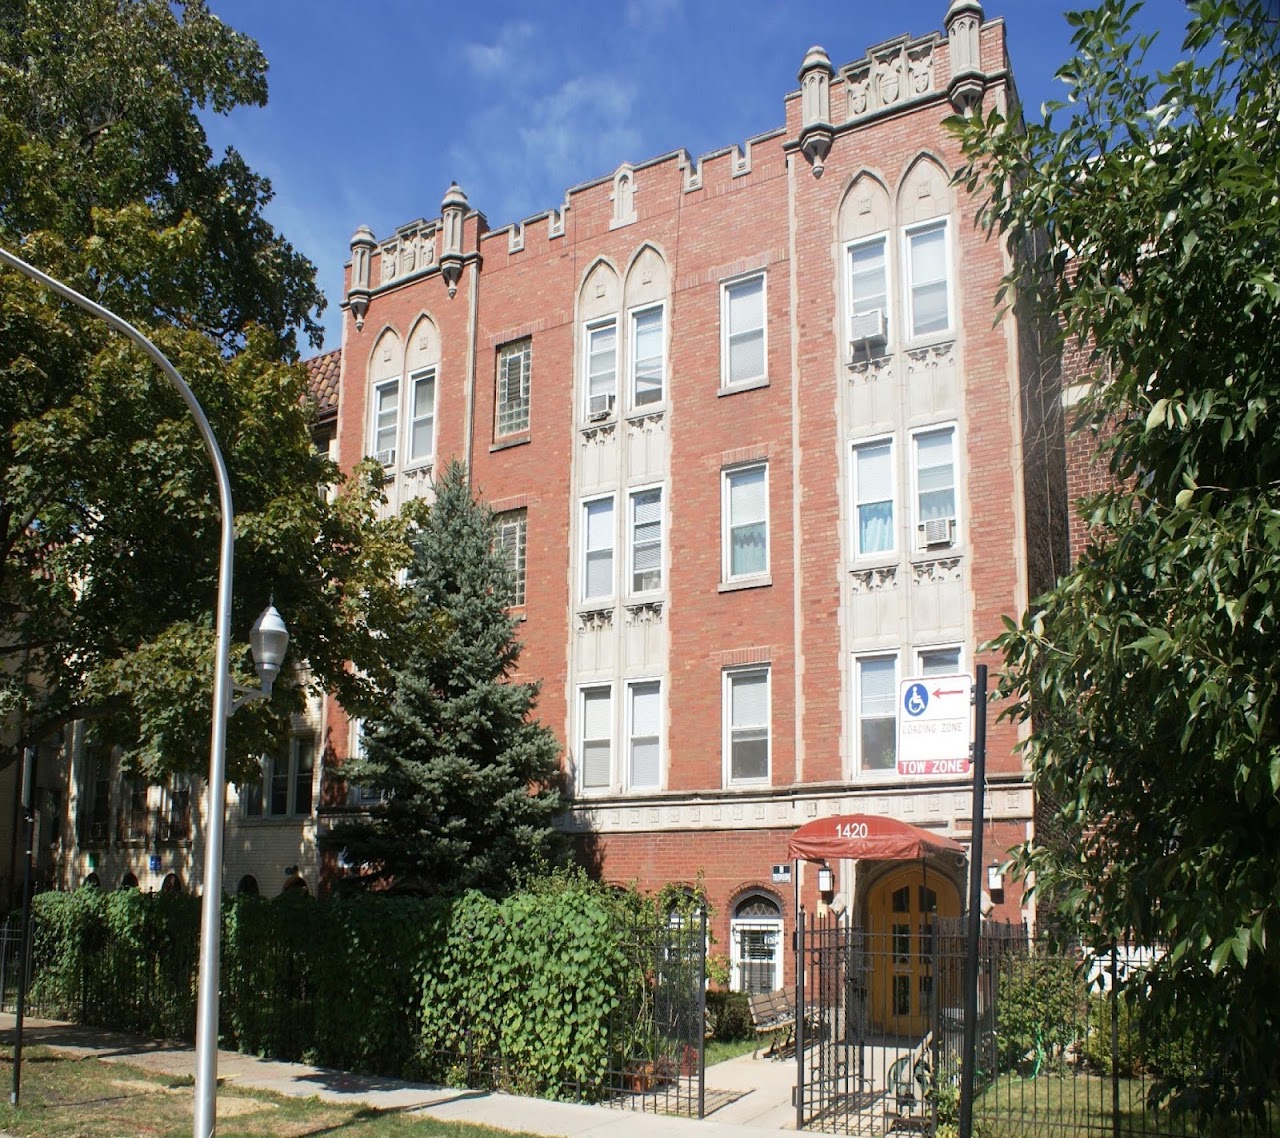 Photo of FARWELL JARVIS at 1418 W FARWELL AVE CHICAGO, IL 60626